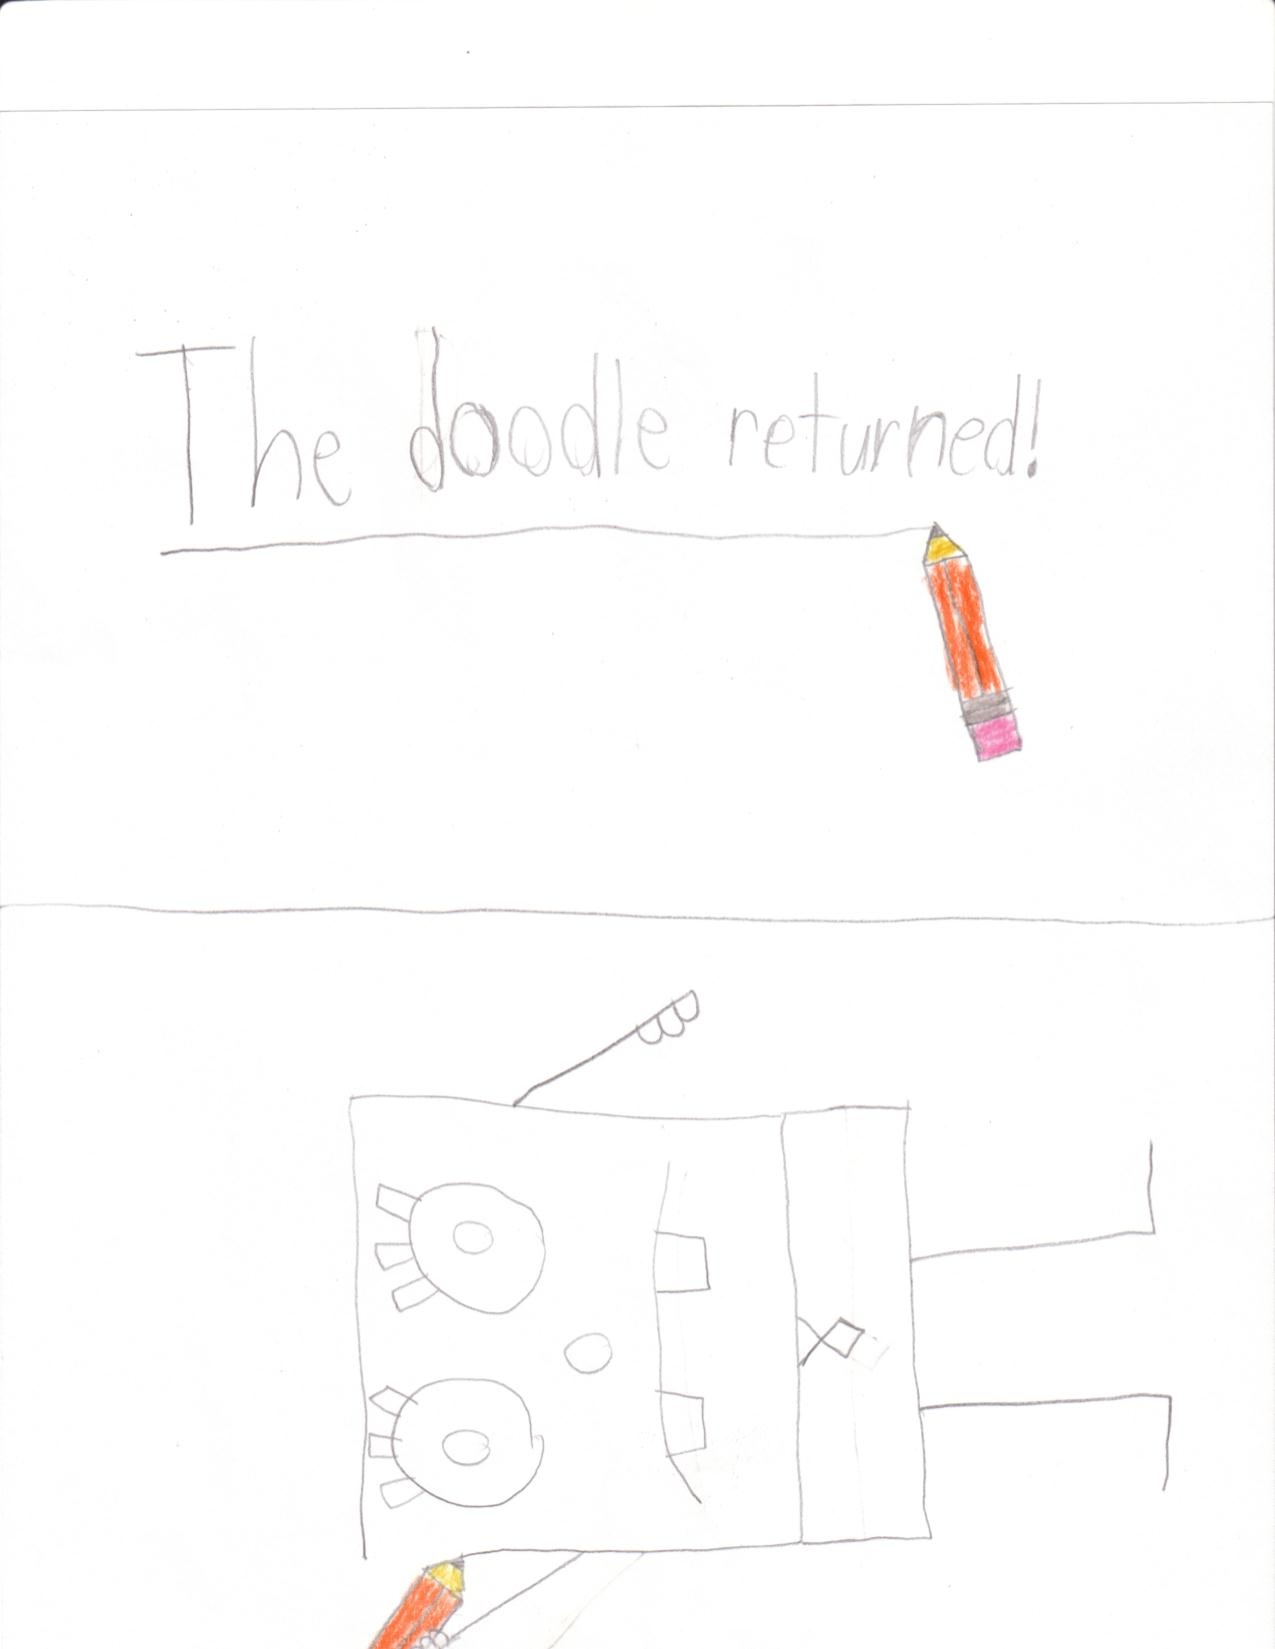 Return of the Doodle by speedcar